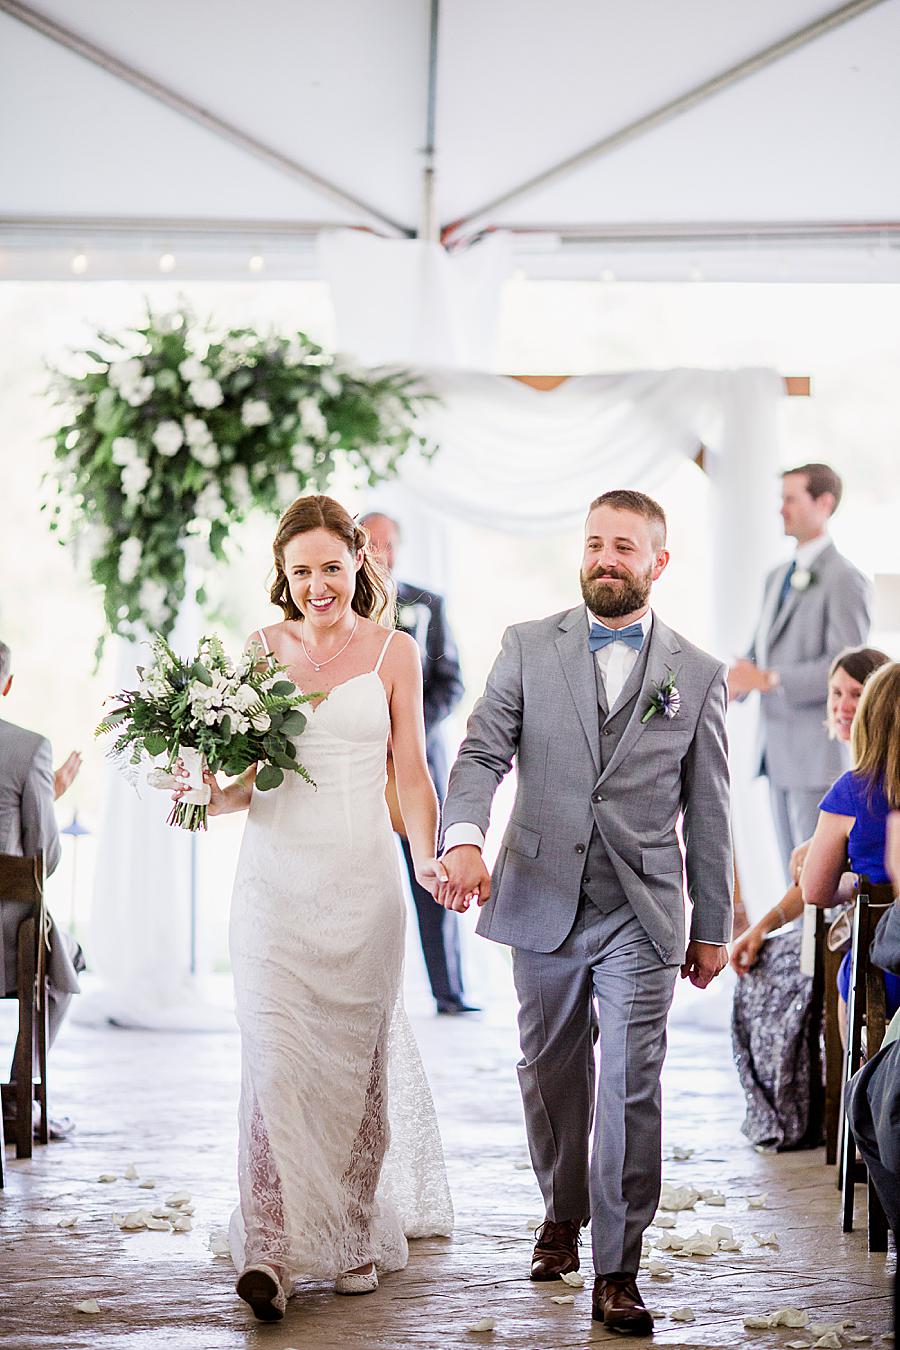 Just married at this Marblegate Farm Wedding by Knoxville Wedding Photographer, Amanda May Photos.